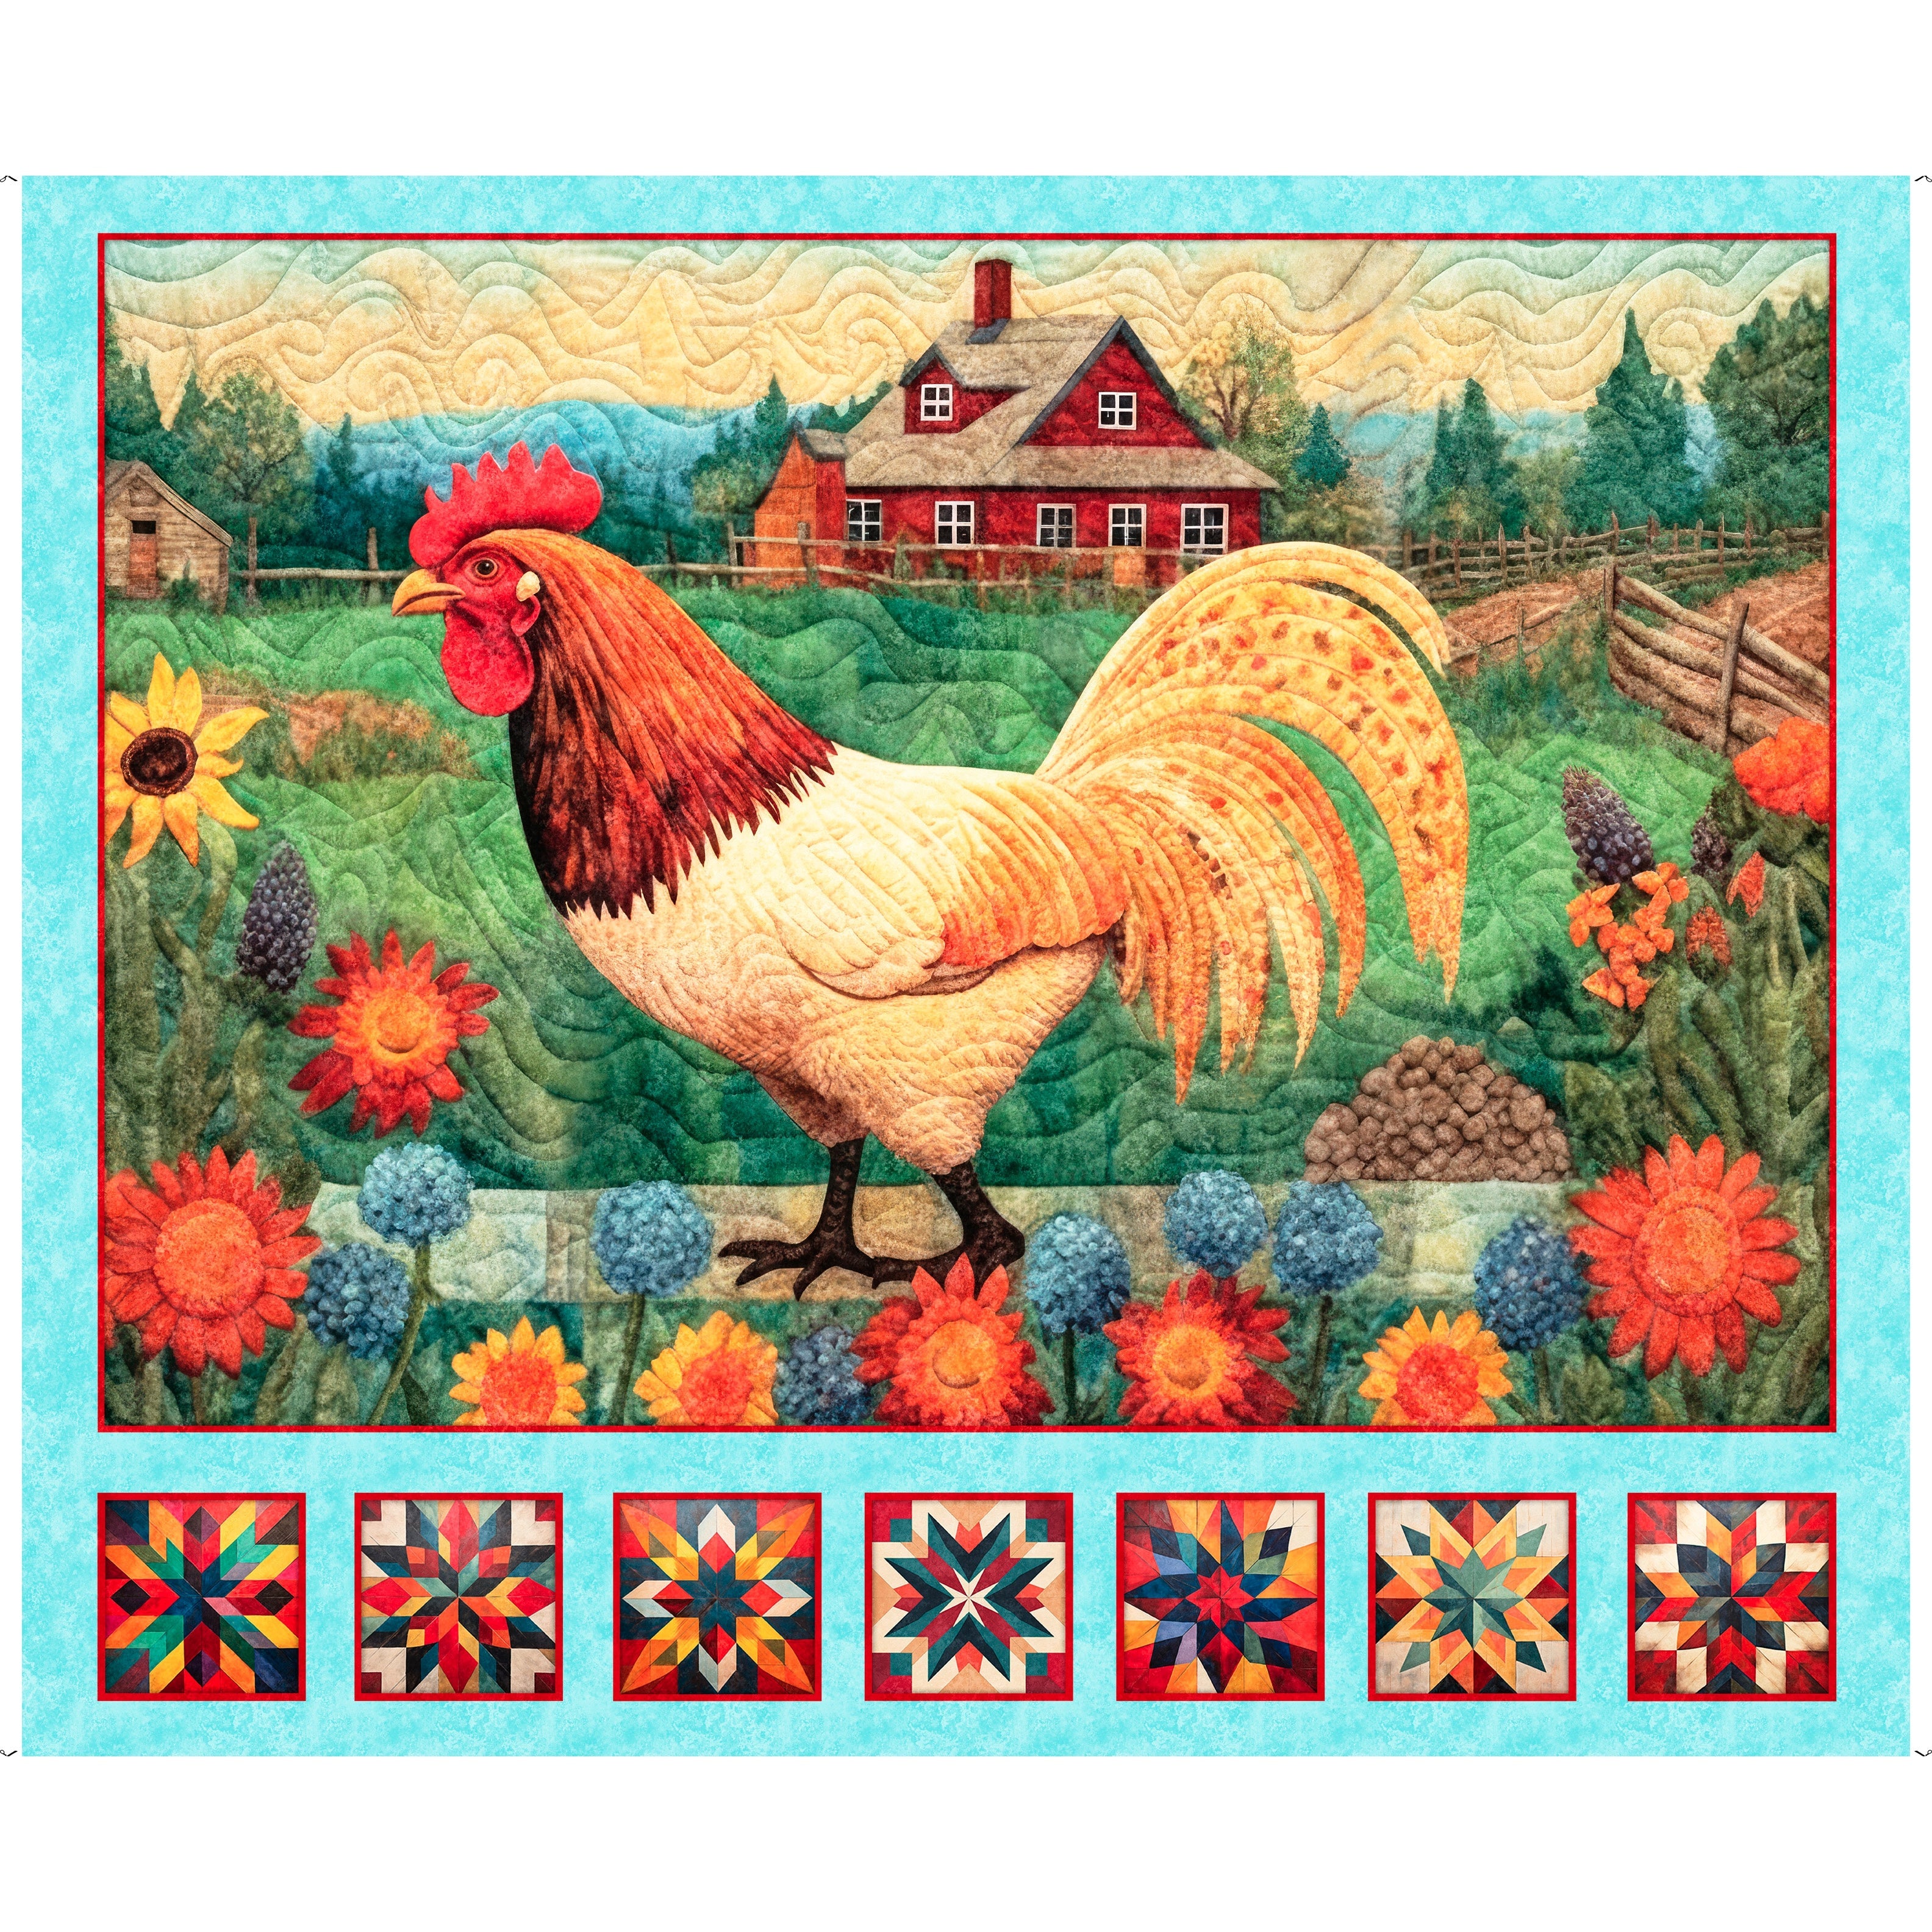 Heartland Rooster Panel Multi